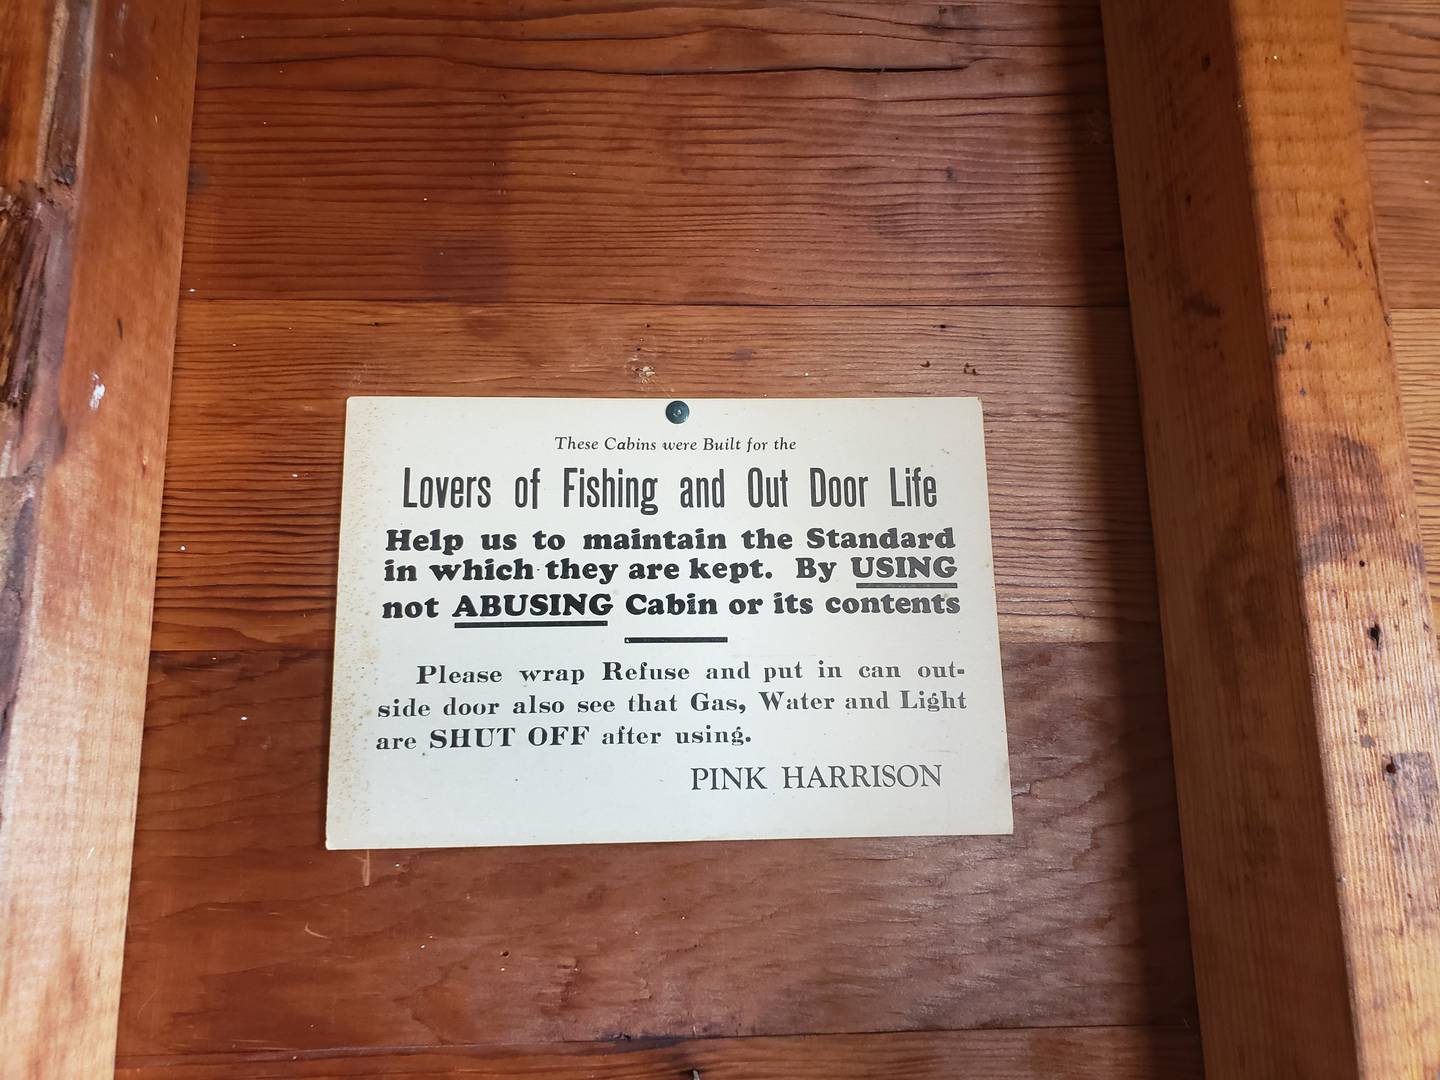 The Tim HarriSon family and the McHenry County Historical Society invite the general public to attend the plaquing ceremony of Cabin No. 8 at the former Pink Harrison’s Resort, 804 Harrison Lane in Johnsburg. The plaqing will be at 1 p.m. Saturday, July 16.